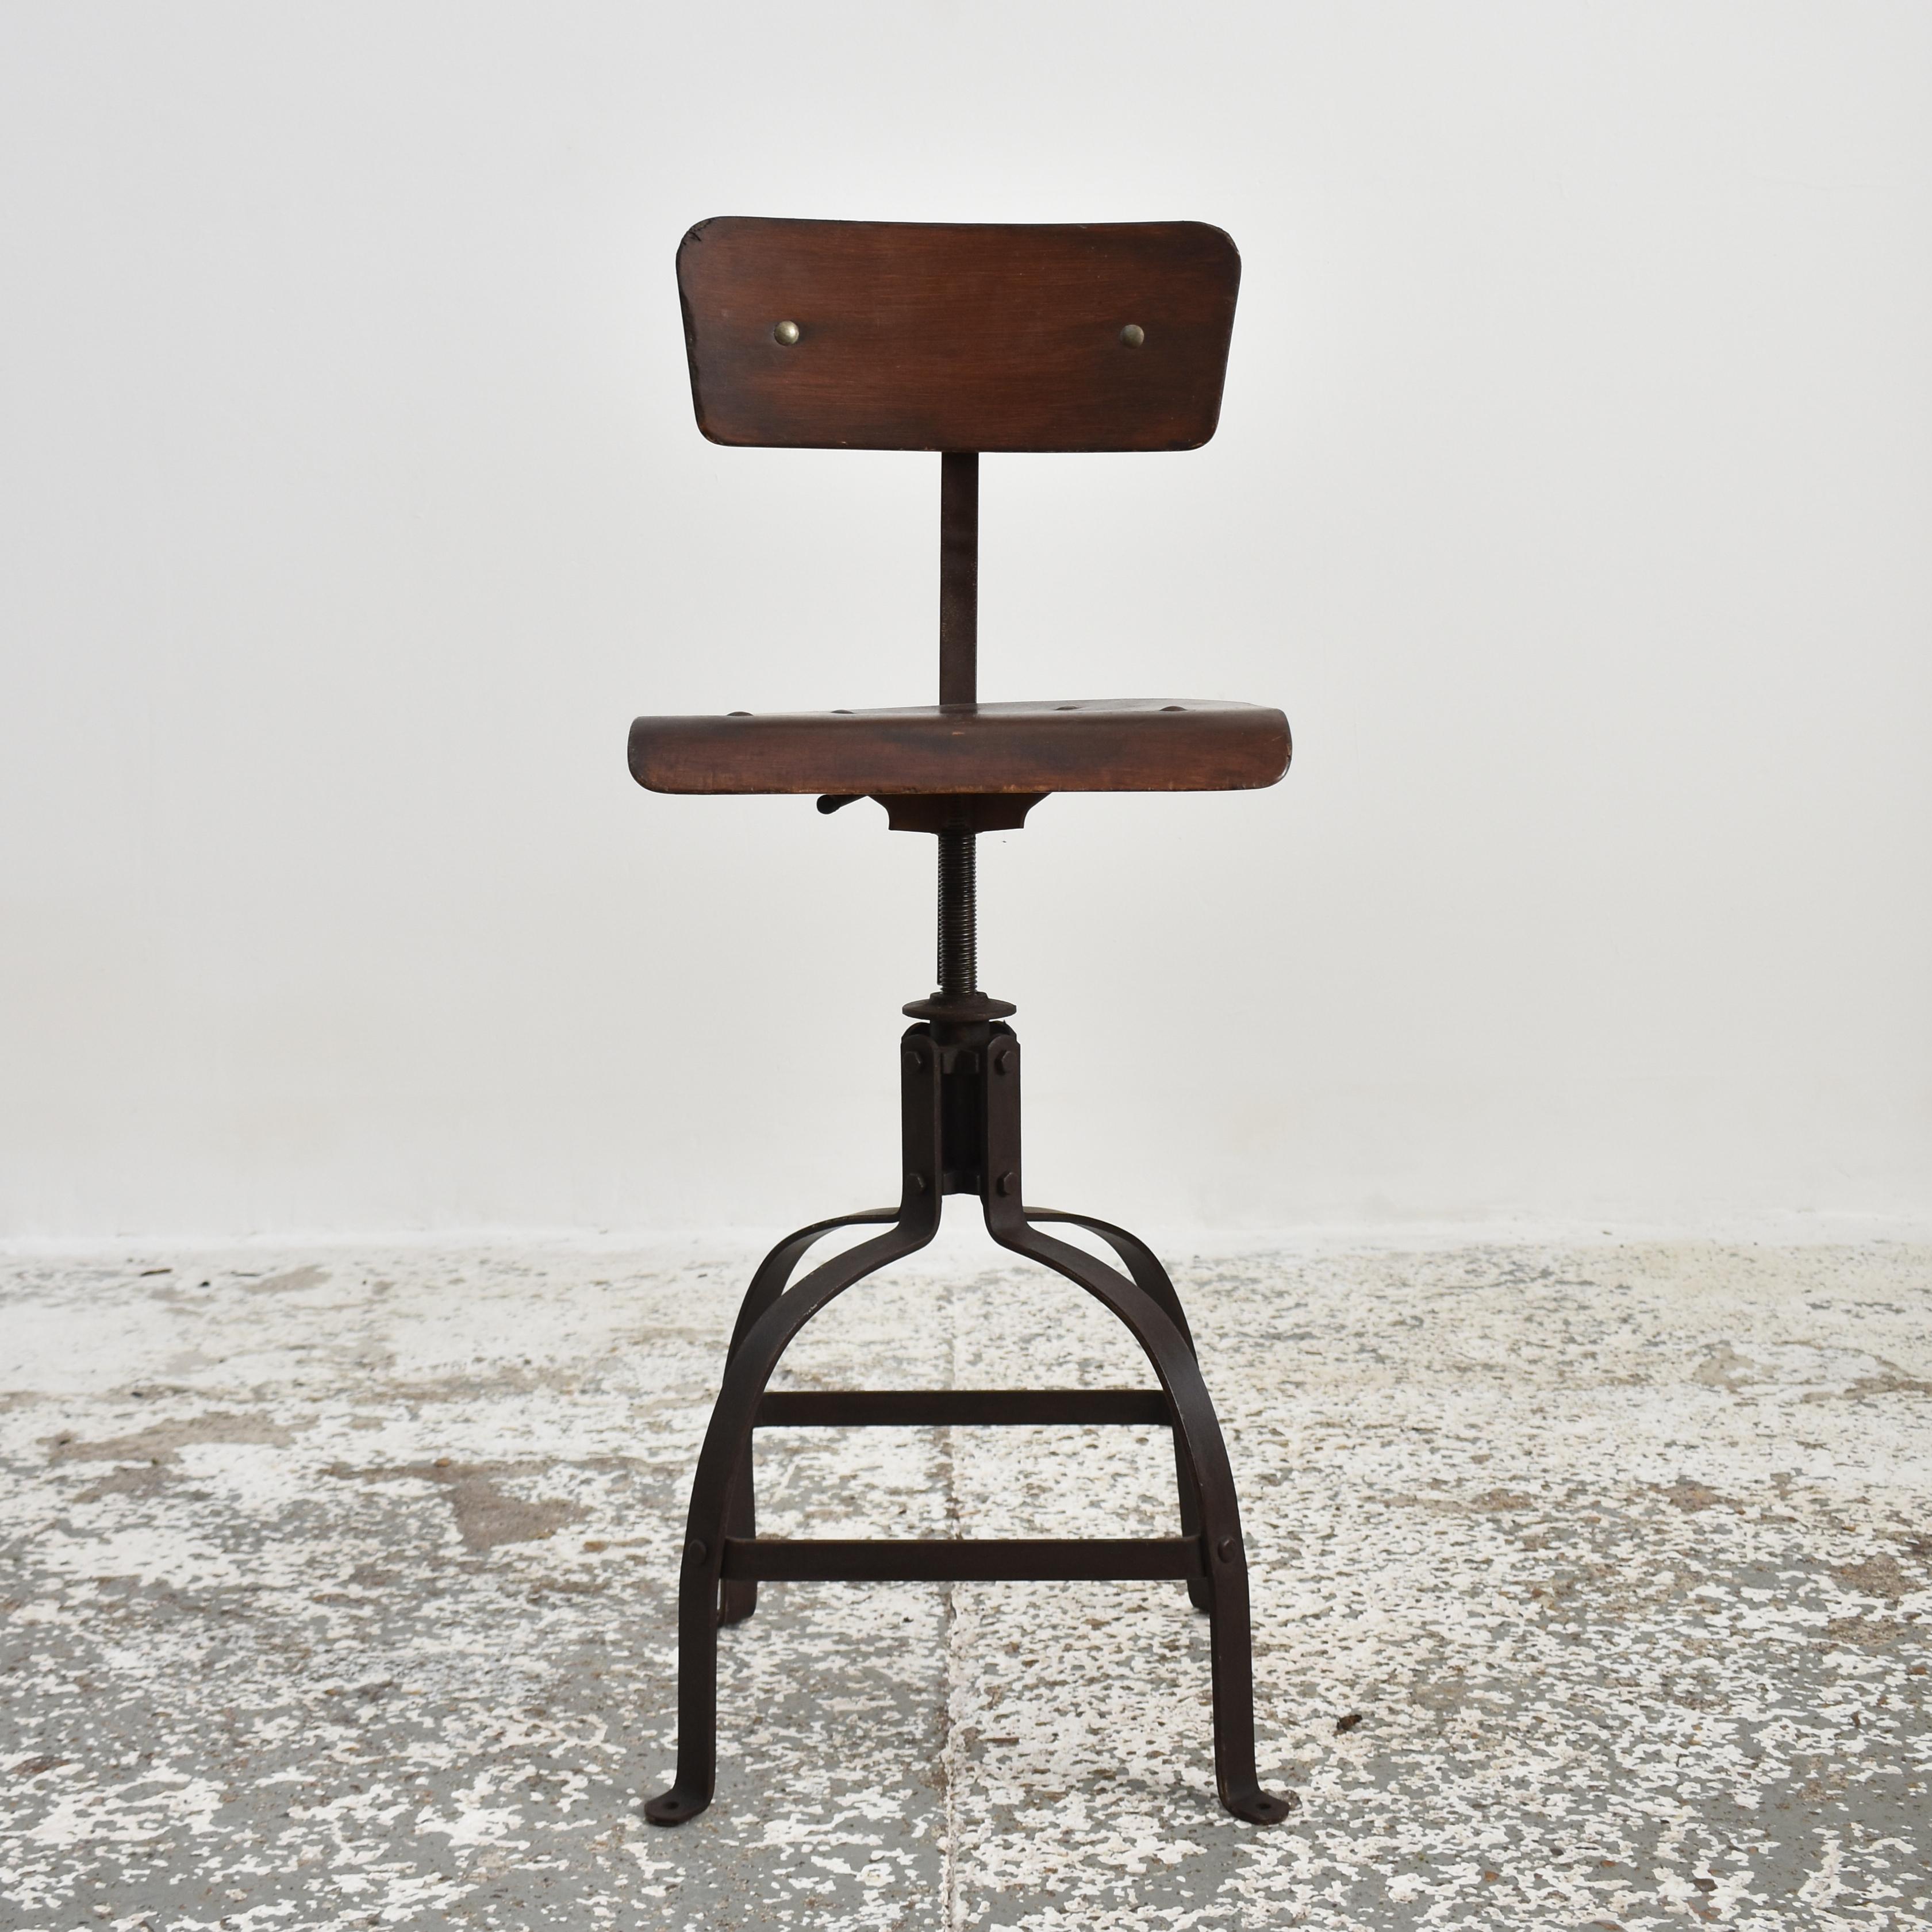 Original French Bienaise Chair Model 204 – E

An original Bienaise Industrial Chair. A classic 1940’s French Industrial Design Produced by the Nelson Brothers – Model No. 204.This chair would have been seen across many industrial French factories in